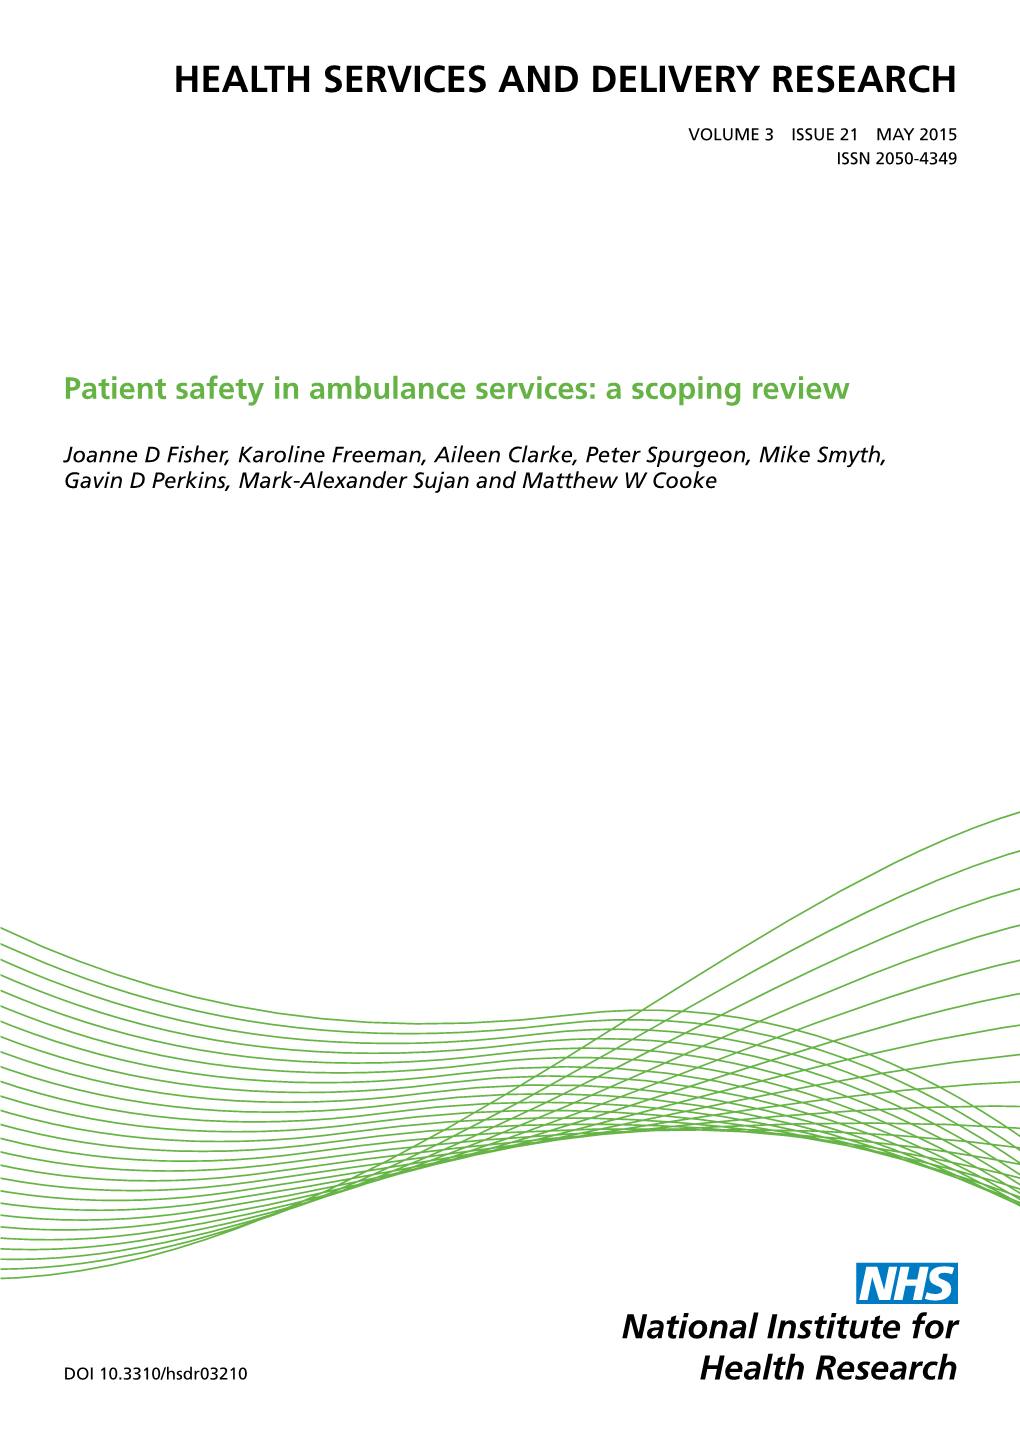 Patient Safety in Ambulance Services: a Scoping Review